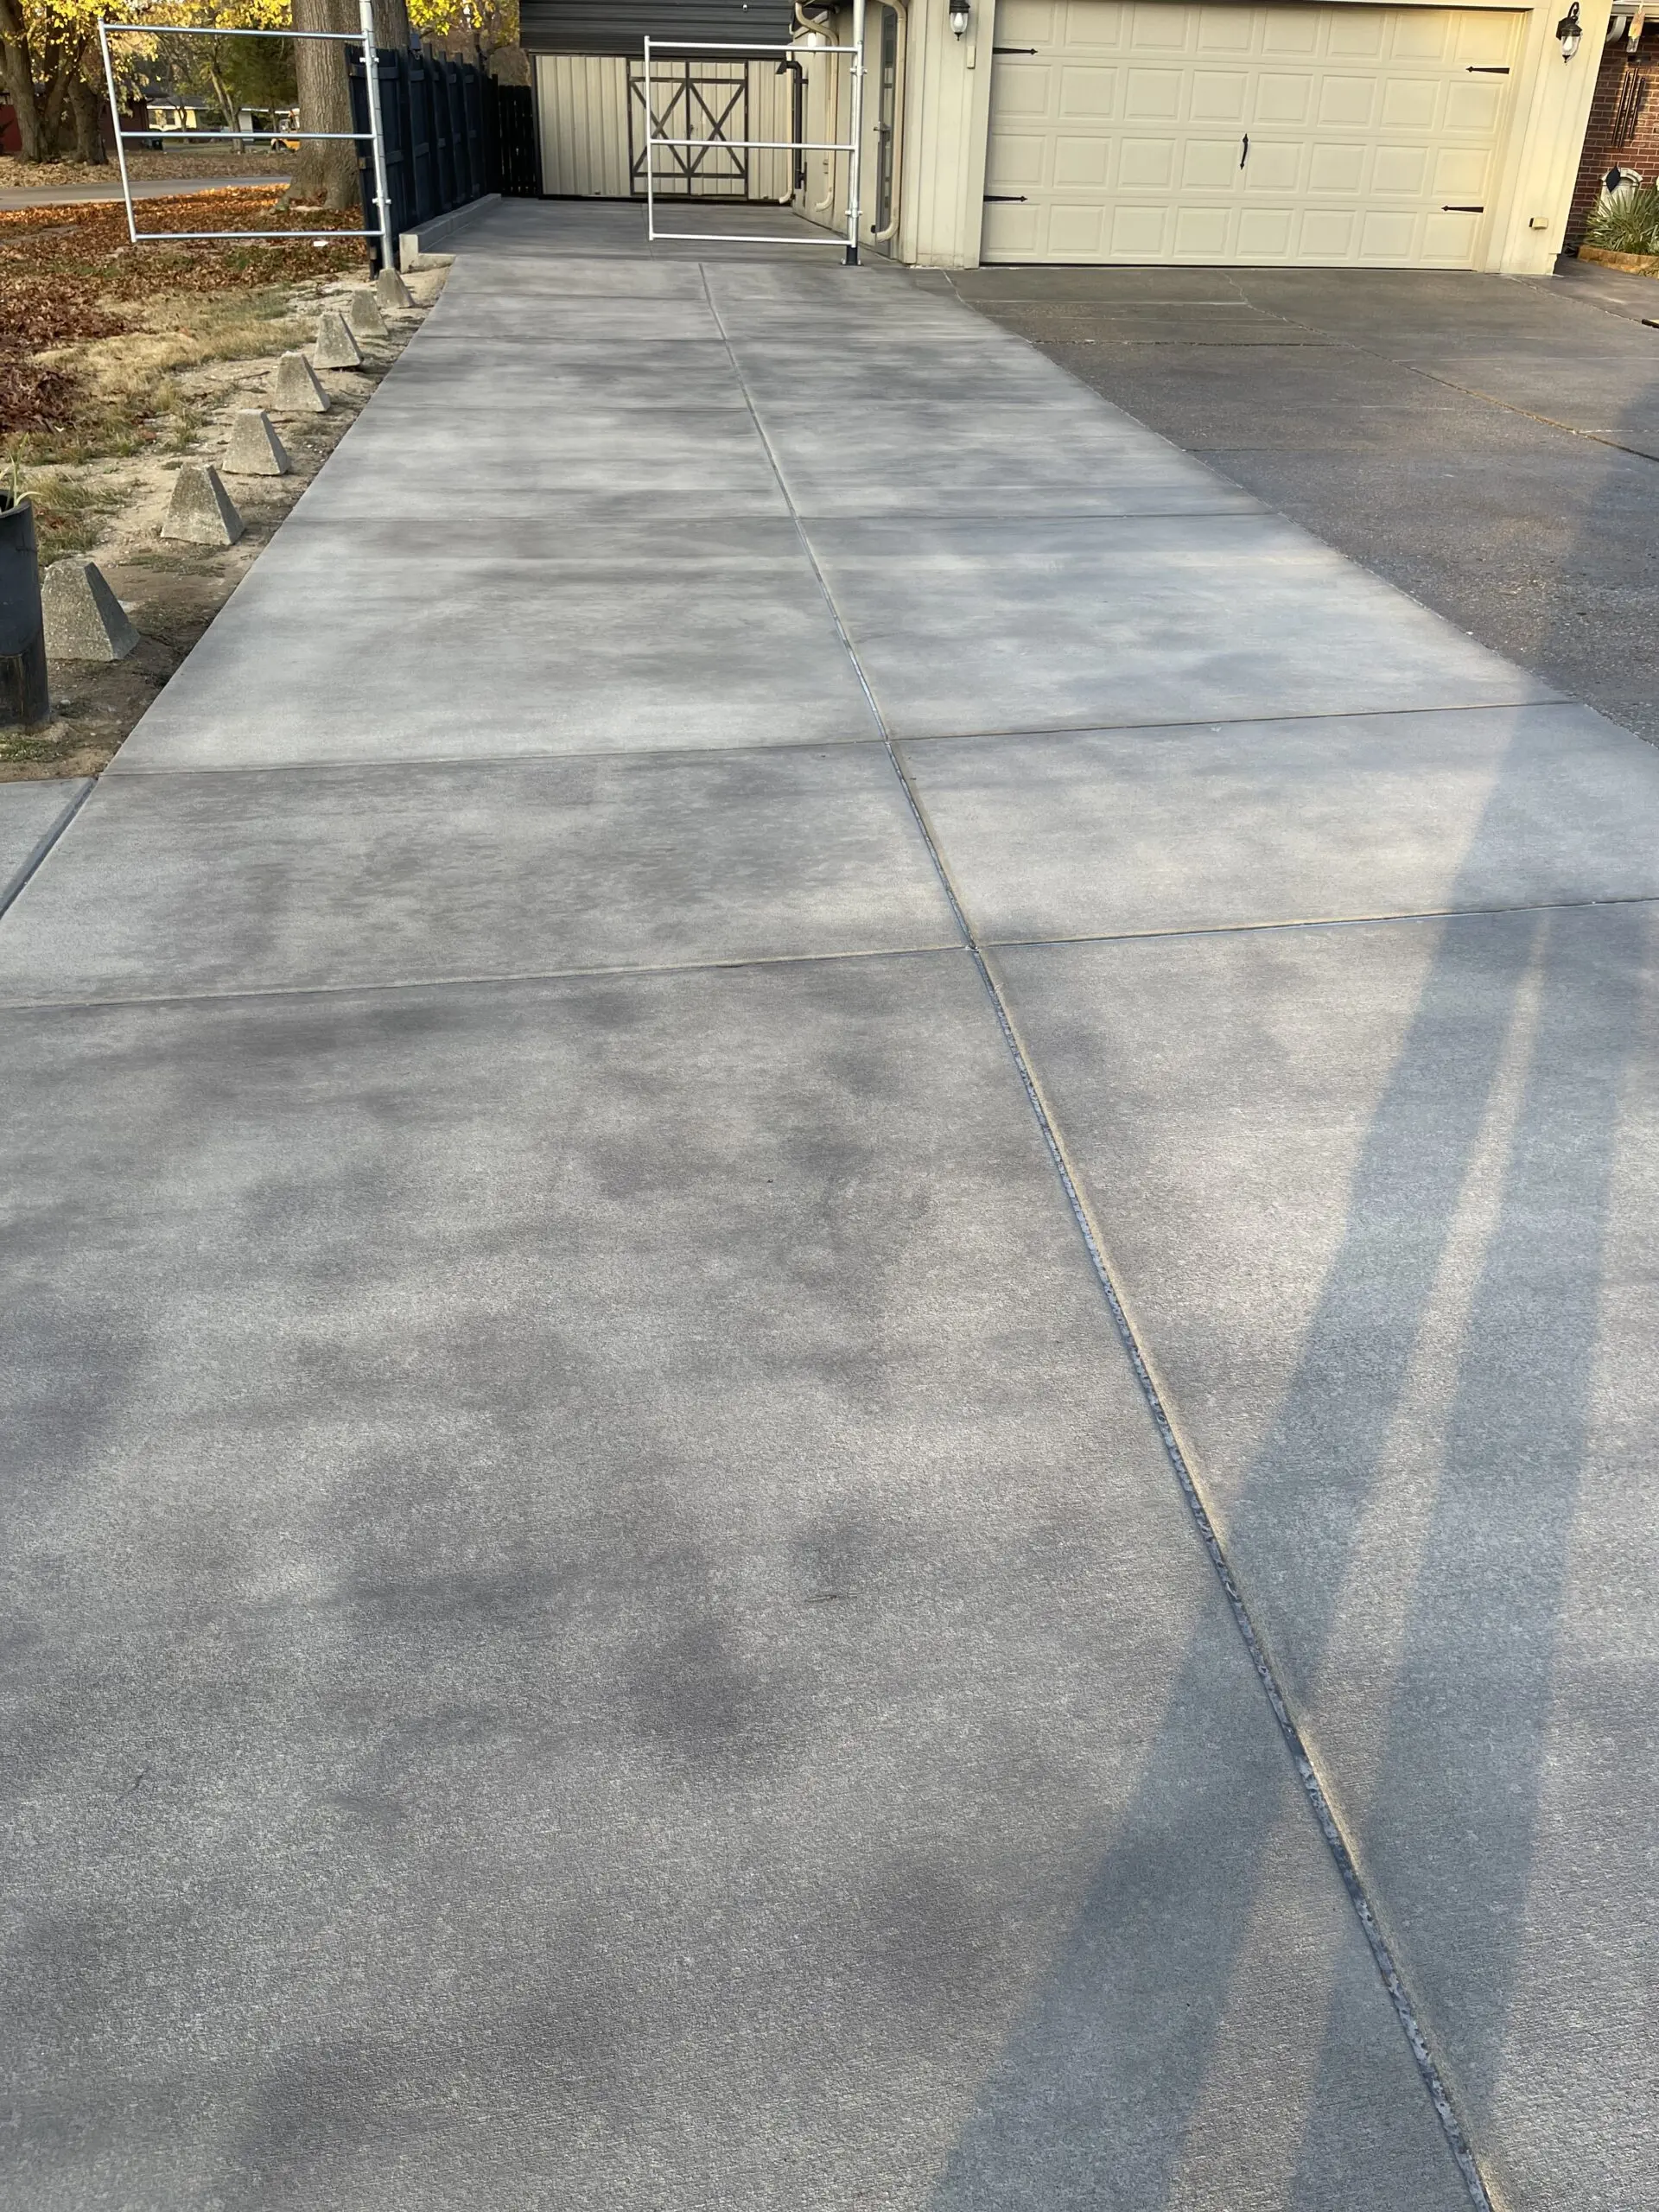 Broomed concrete driveway after being stained with Light Charcoal Antiquing, showing a rich and even color enhancement.